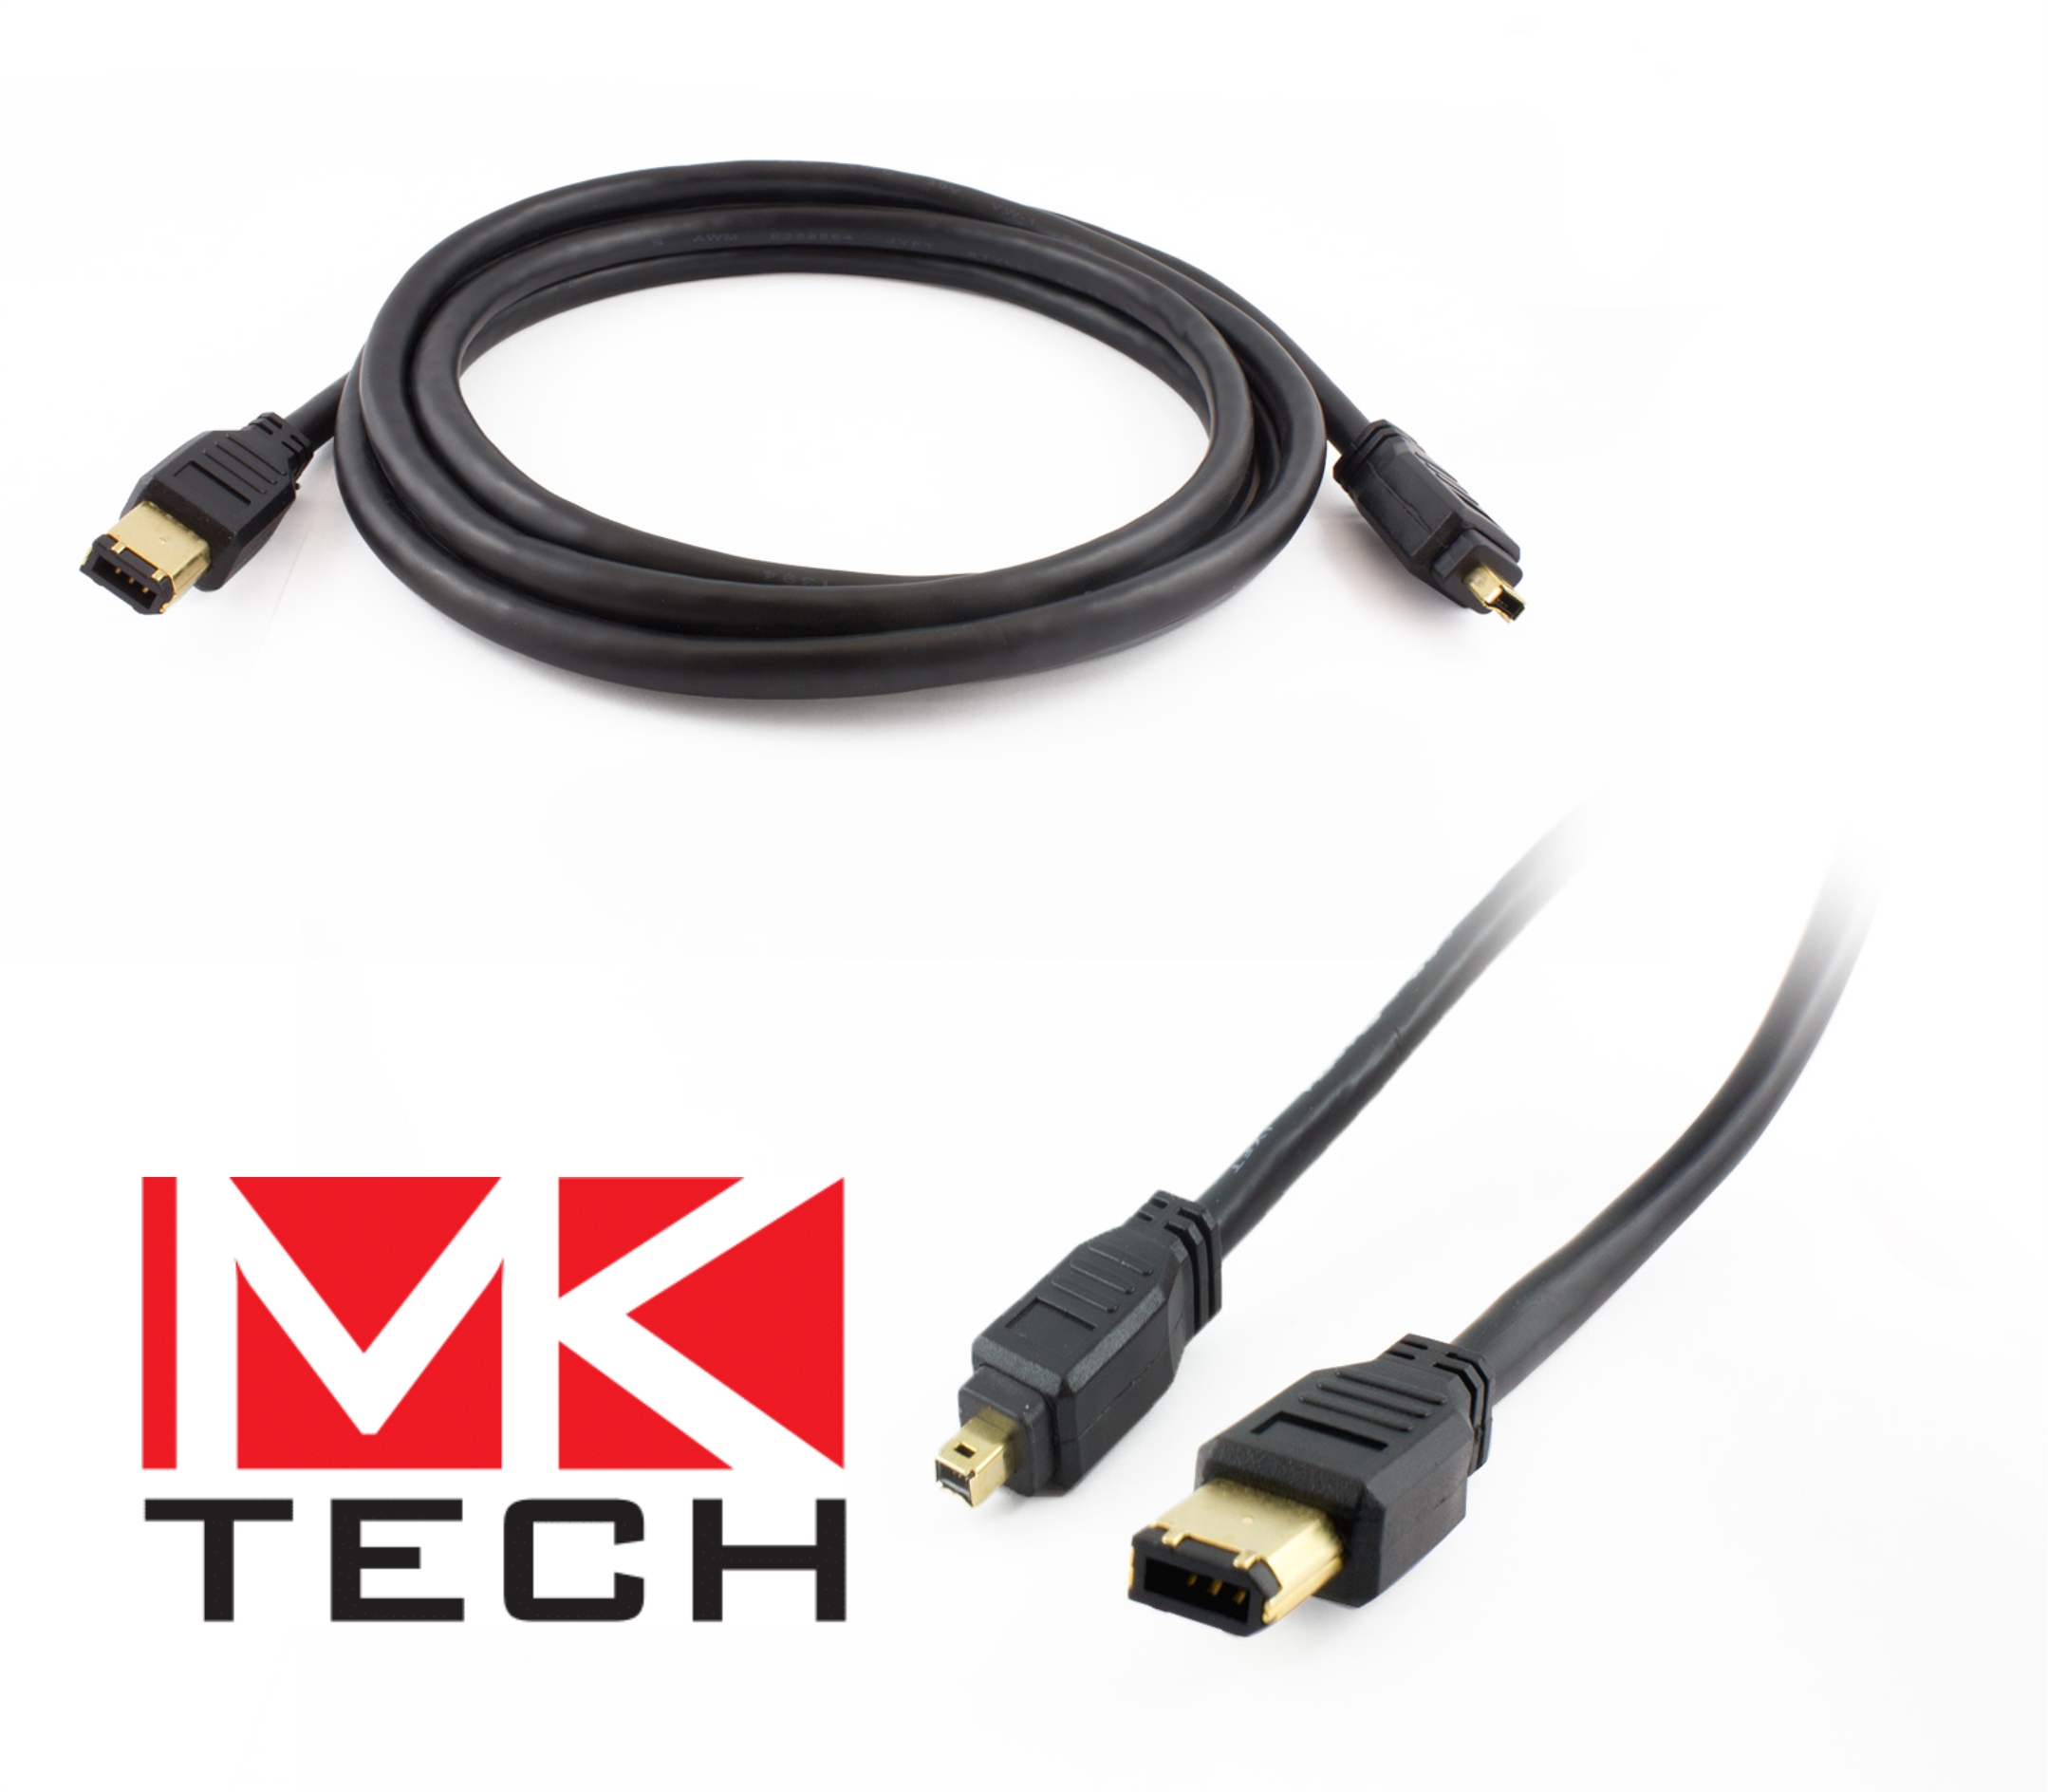 MKTECH IEEE-1394 cable, type 4/6, 1.0m